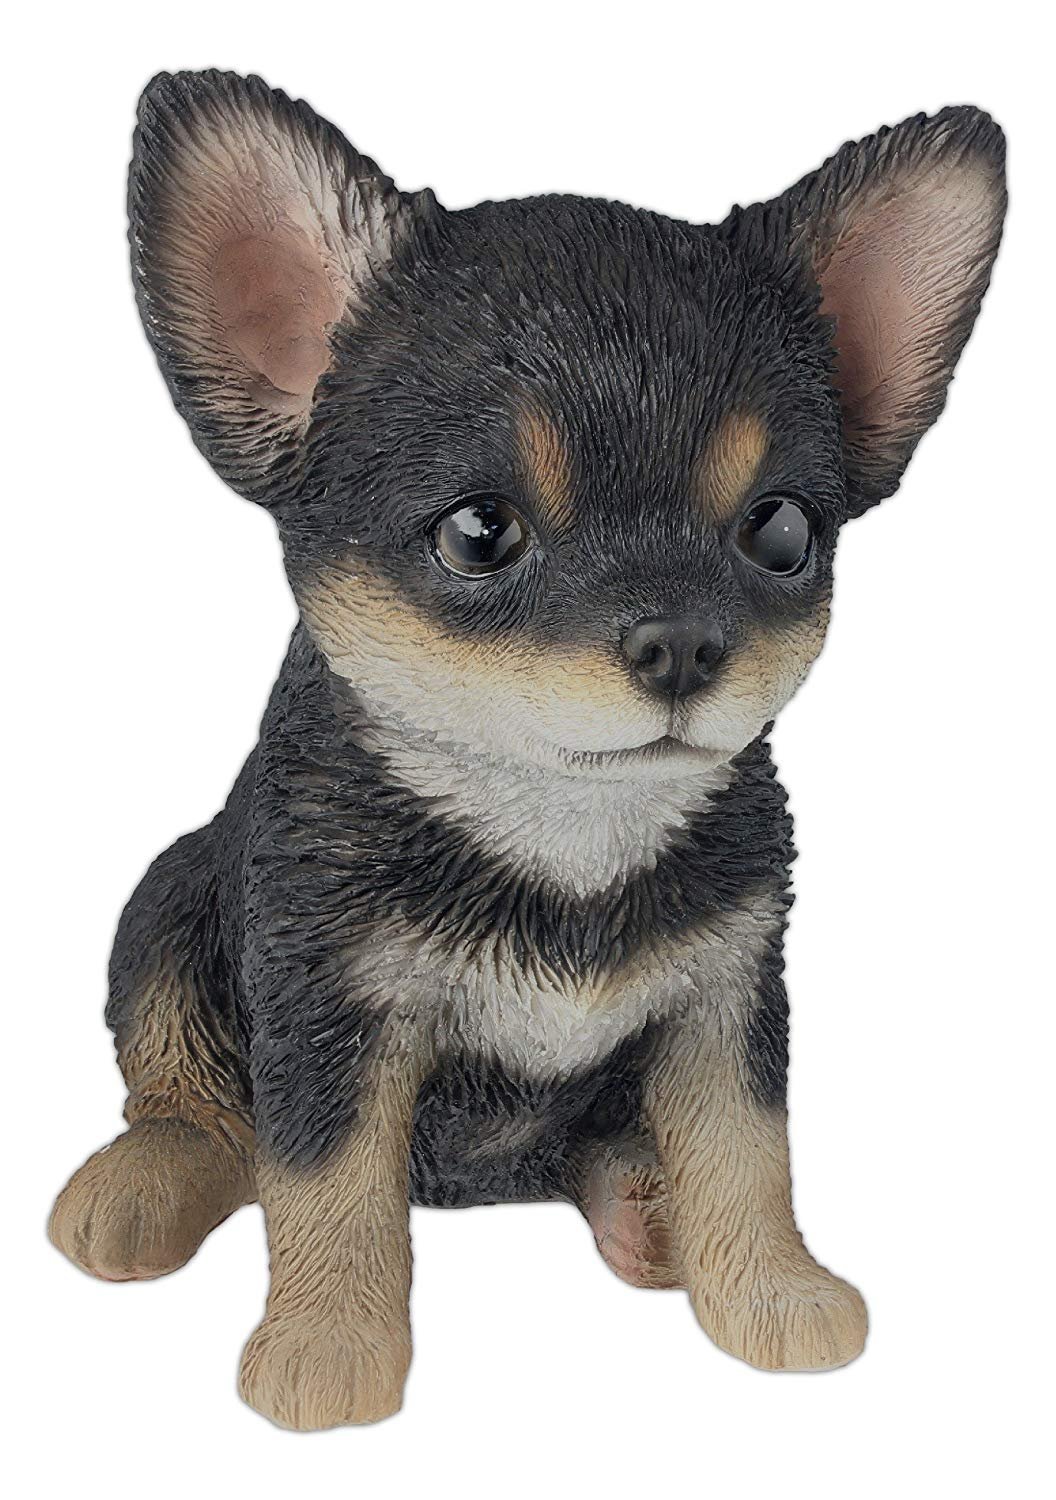 Nature's Gallery "Pet Pals" Statue (Black & White Chihuahua Puppy)